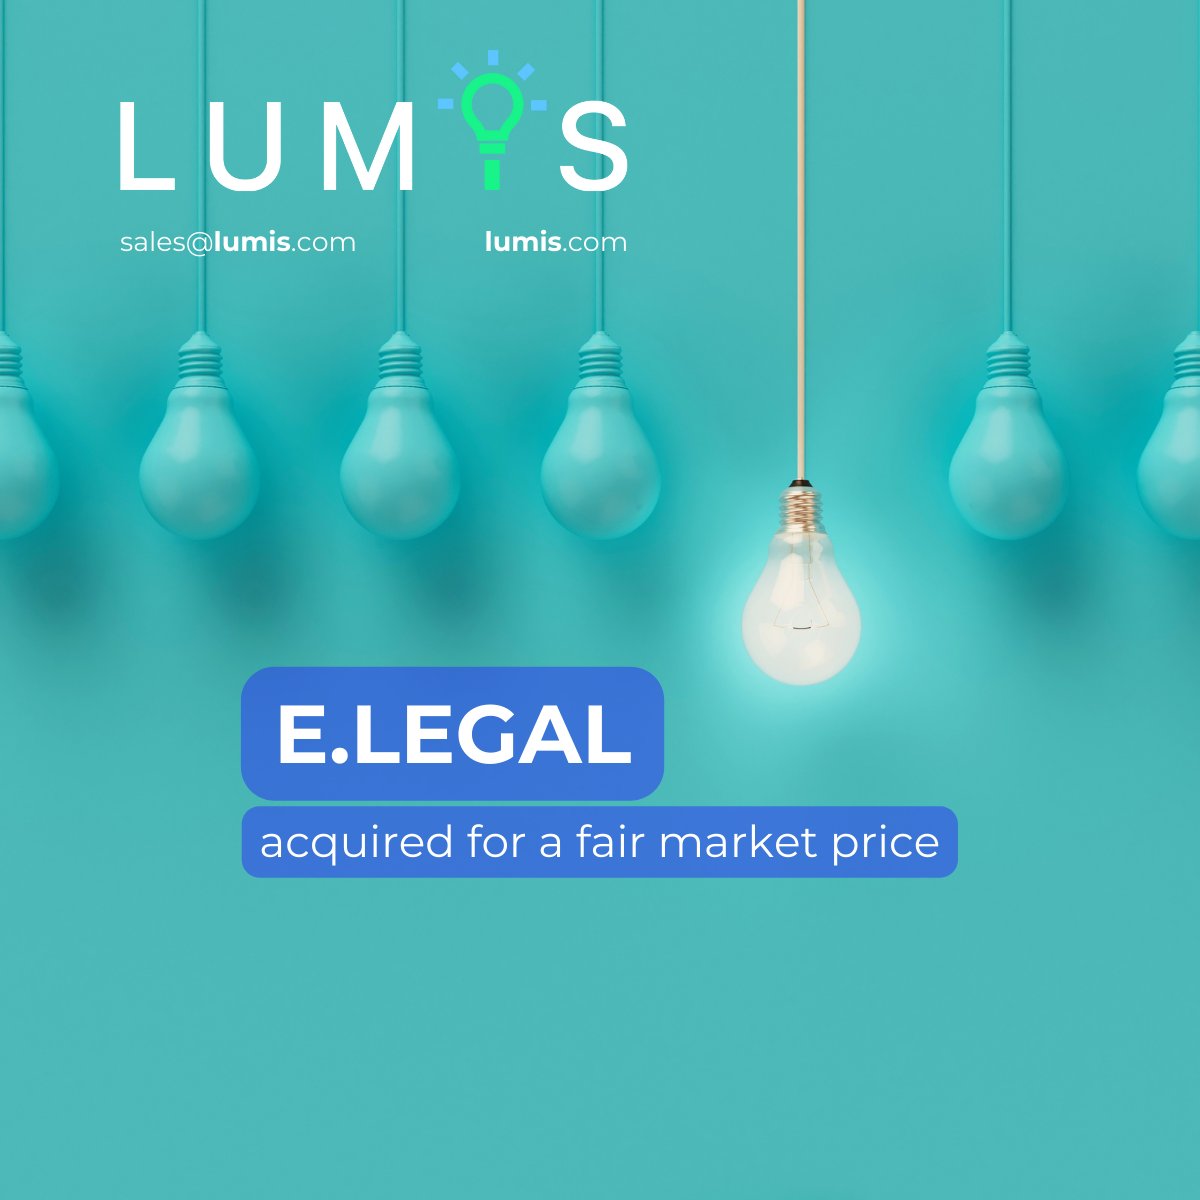 e.legal has been acquired. 

#Lumis